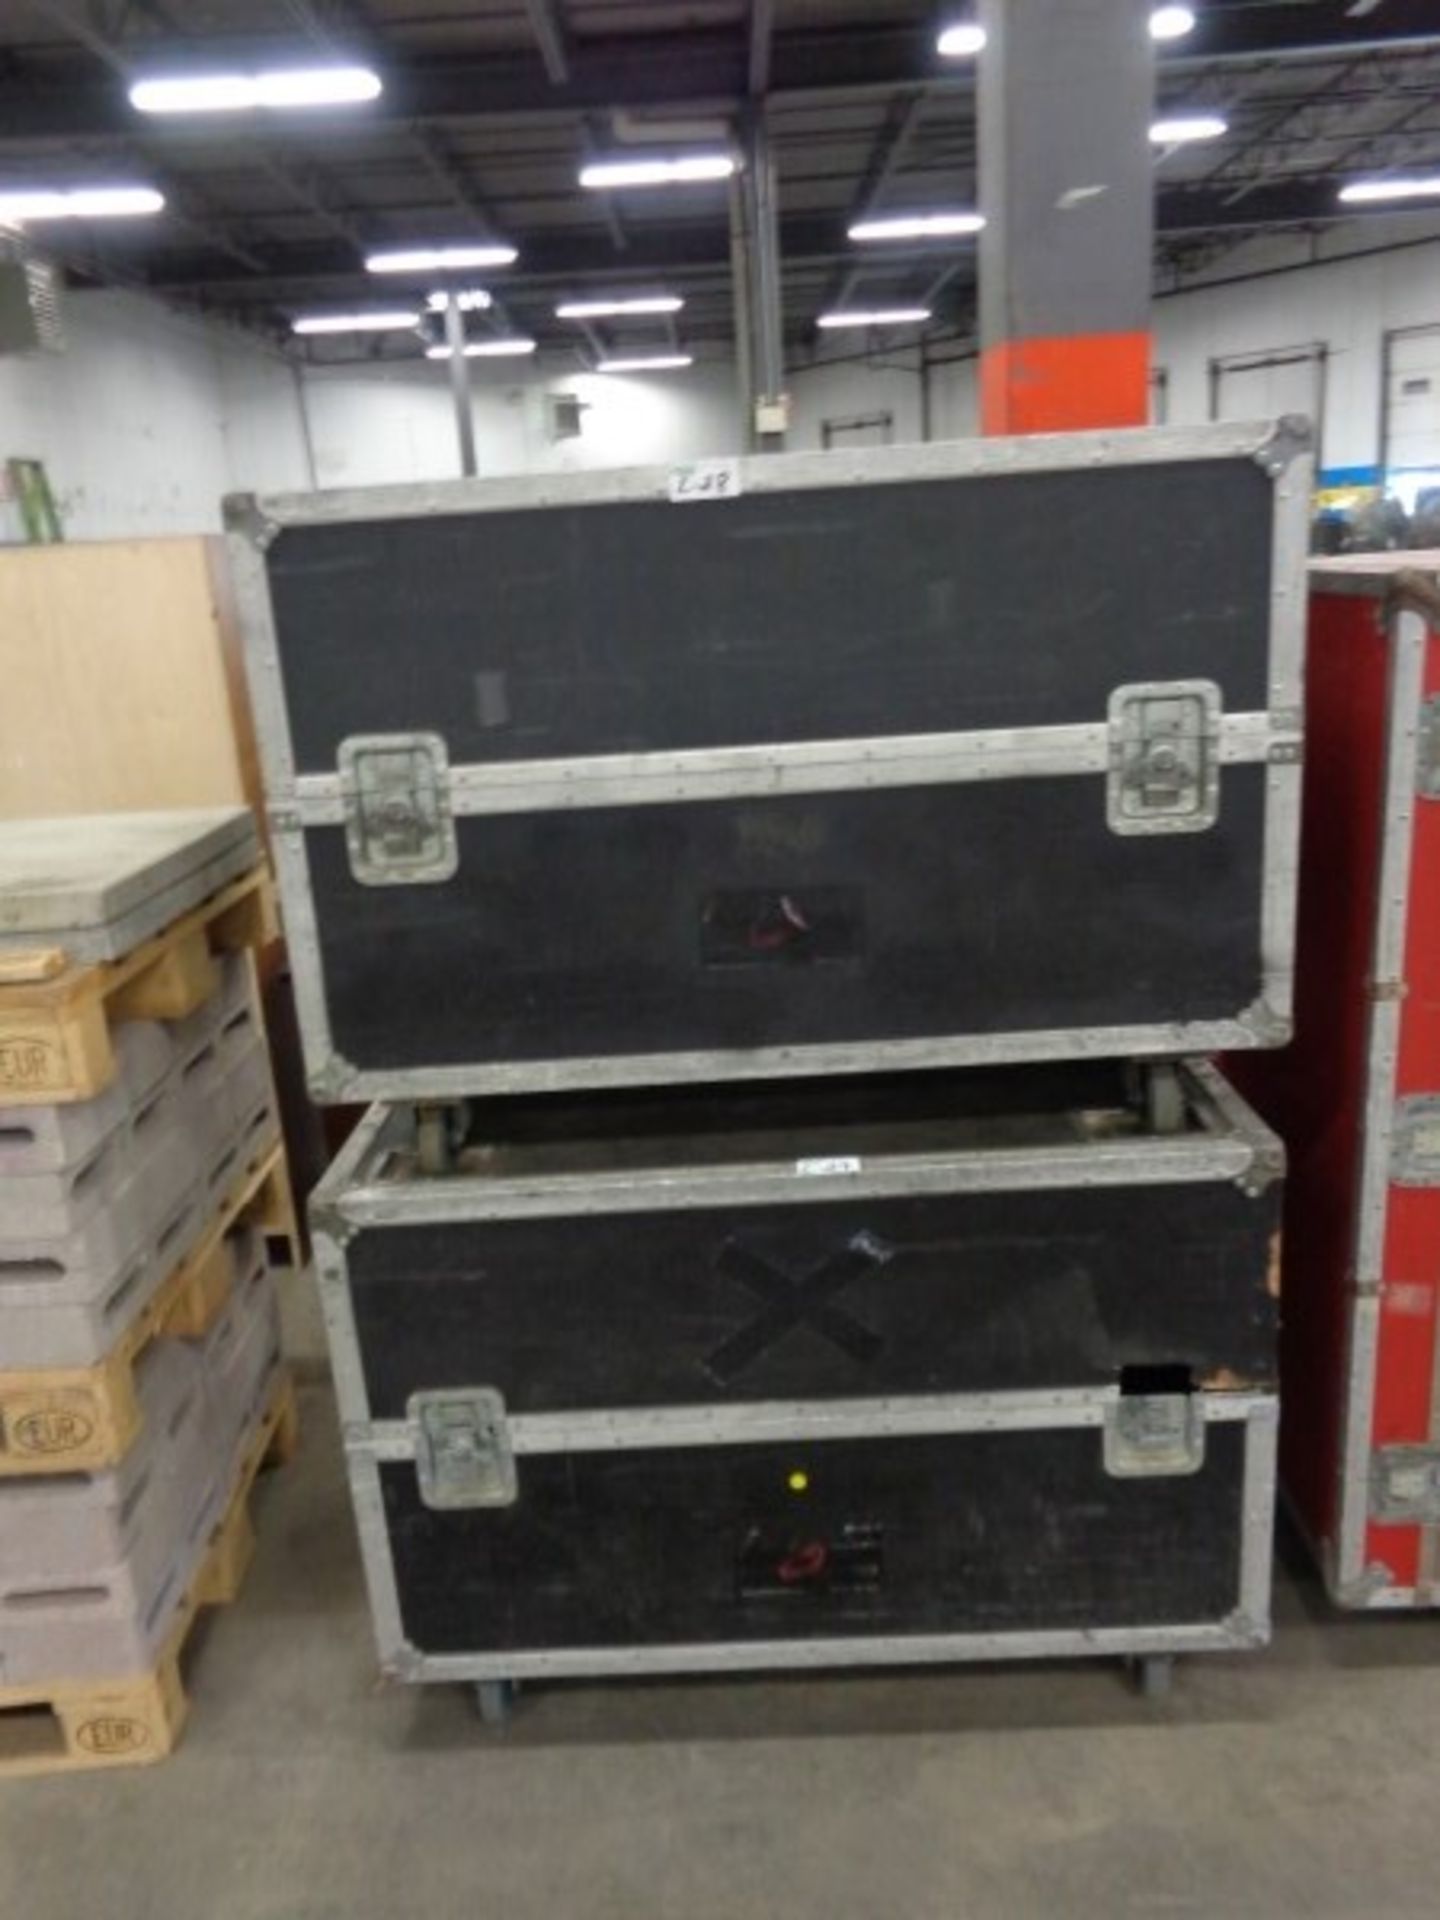 MOBILE ROAD CASE APROX 47" X 33" X 28" H